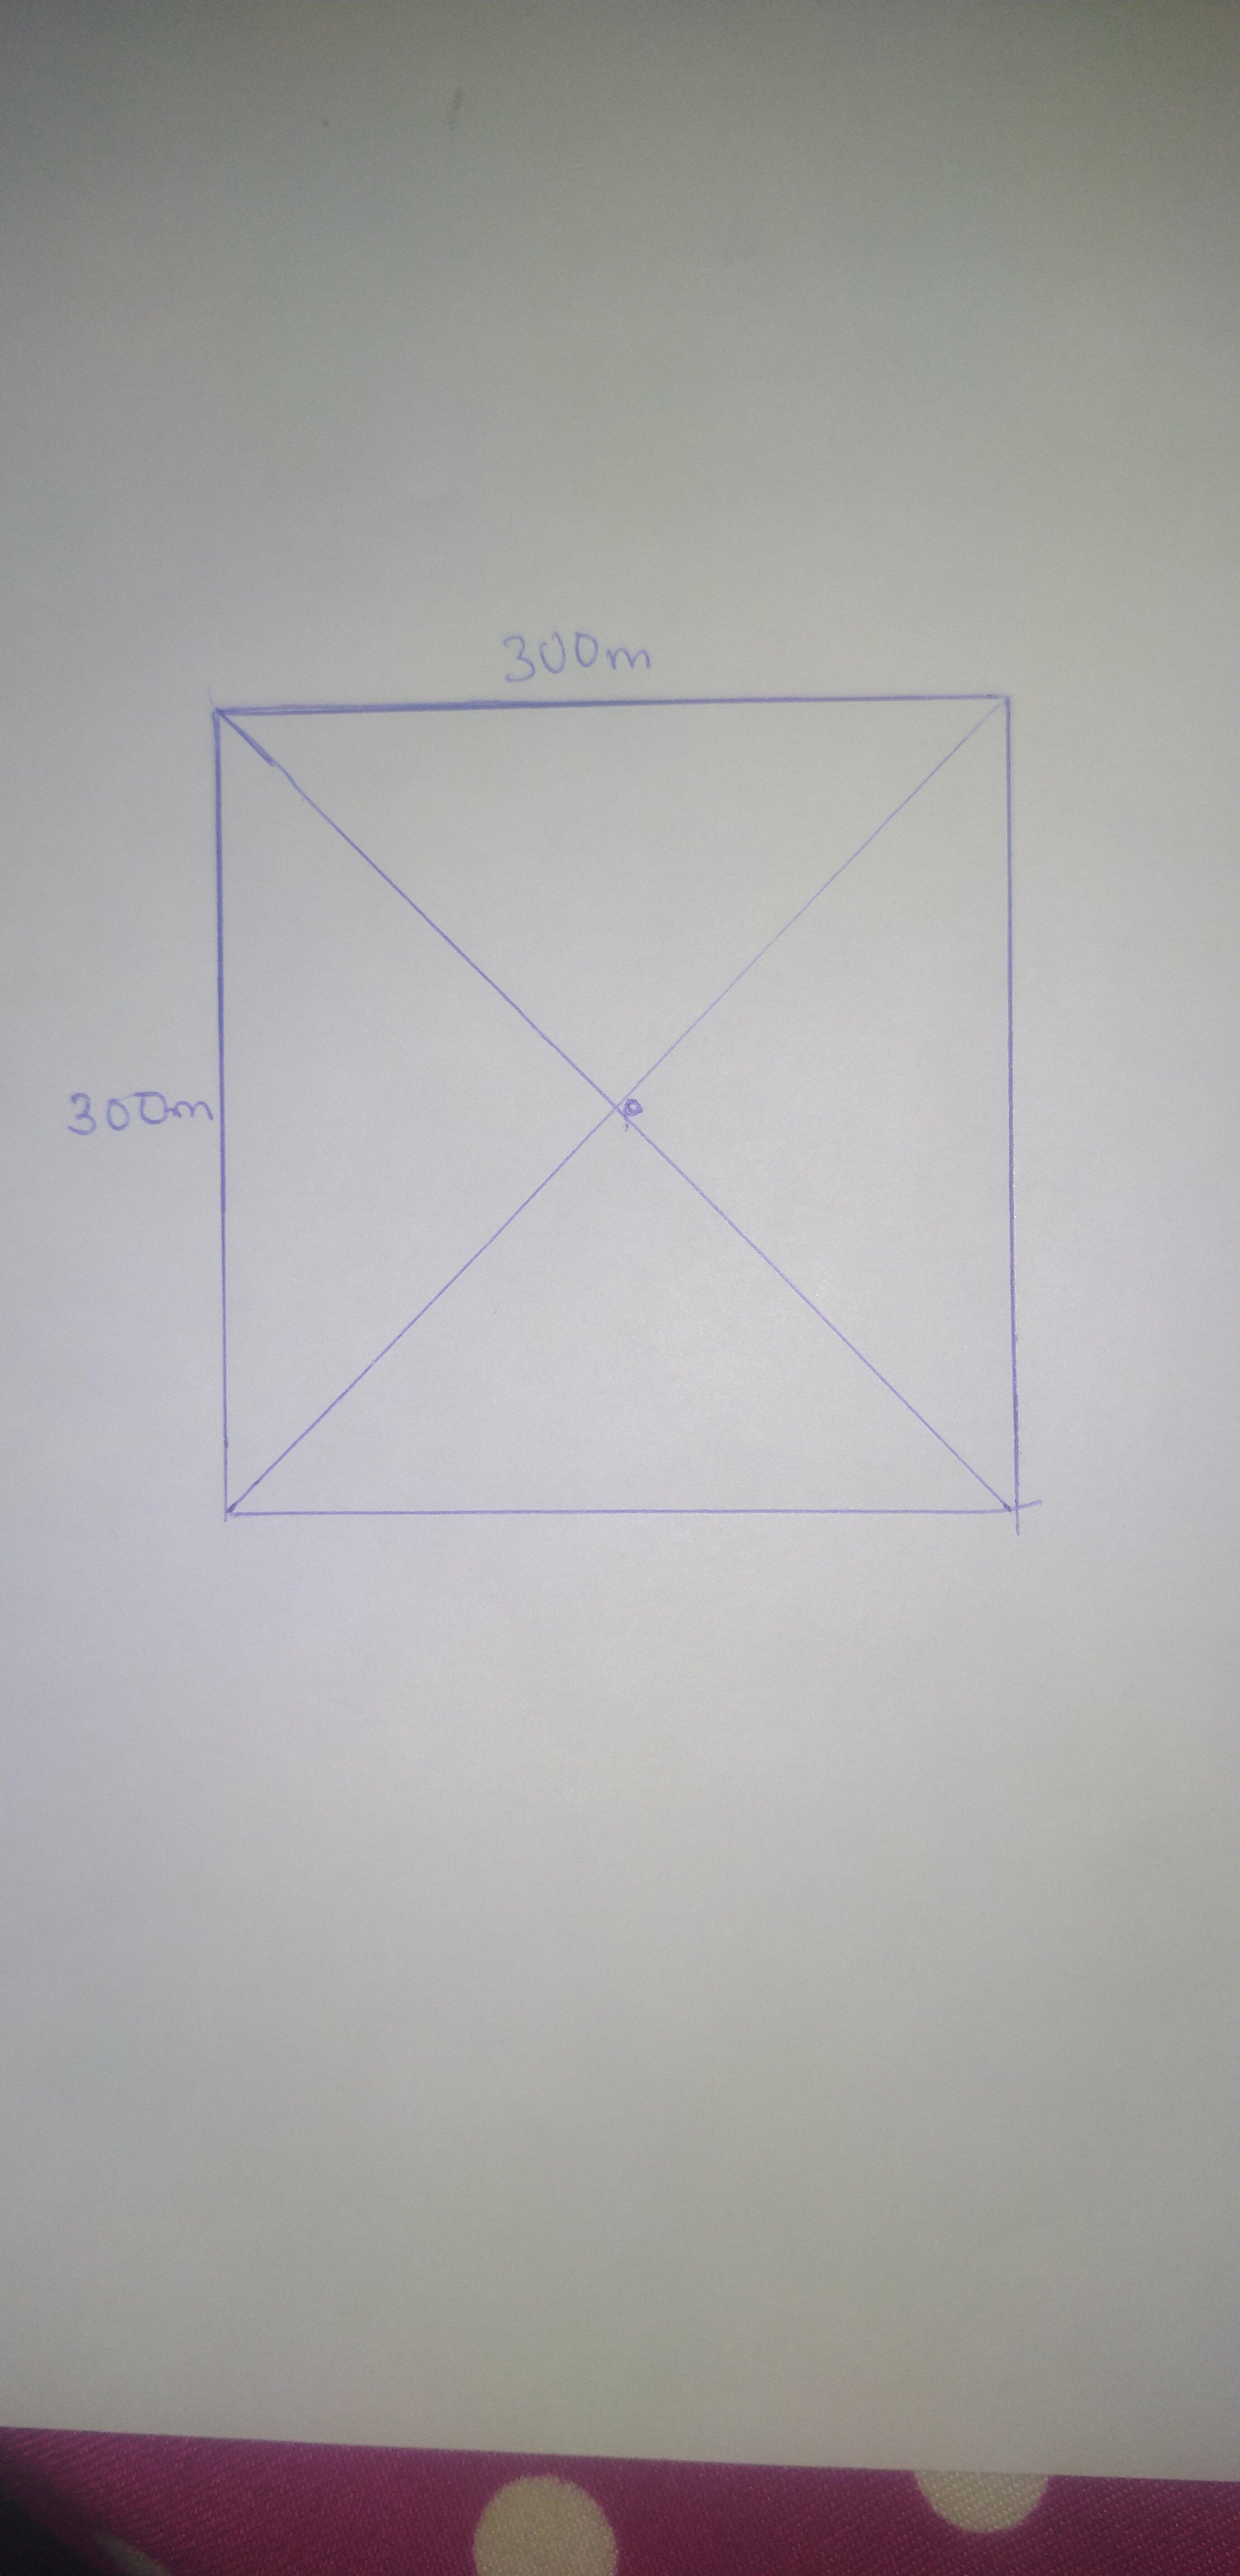 A Square Field Is 300m 300m. Draw A Plan Of The Field. Find The Distance Of The Centre Of The Field From